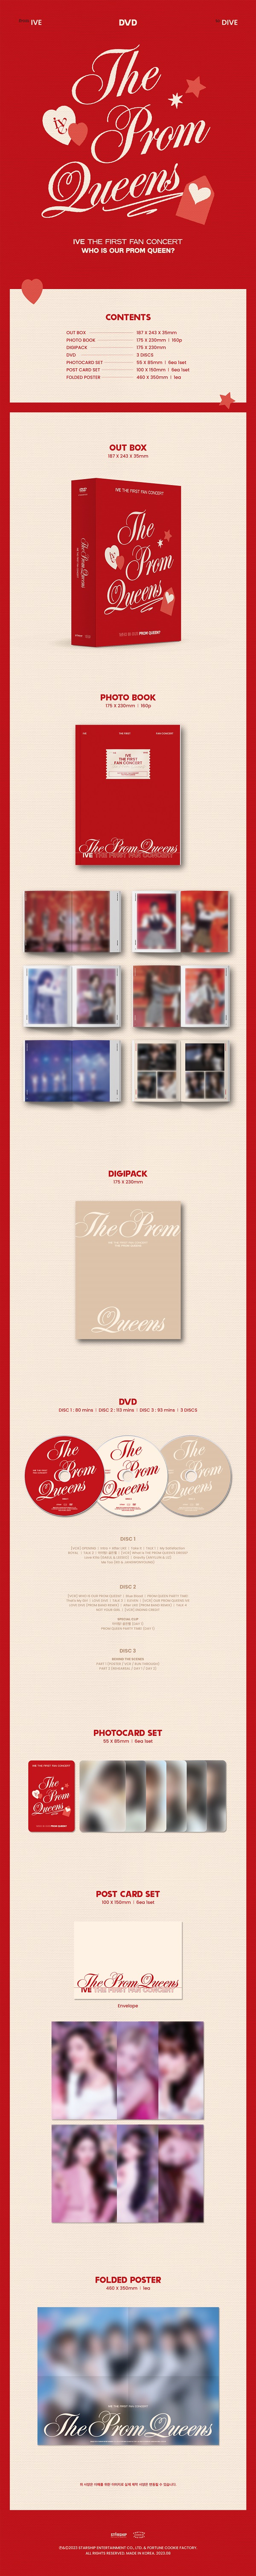 IVE｜『IVE THE FIRST FAN CONCERT <The Prom Queens>』Blu ...